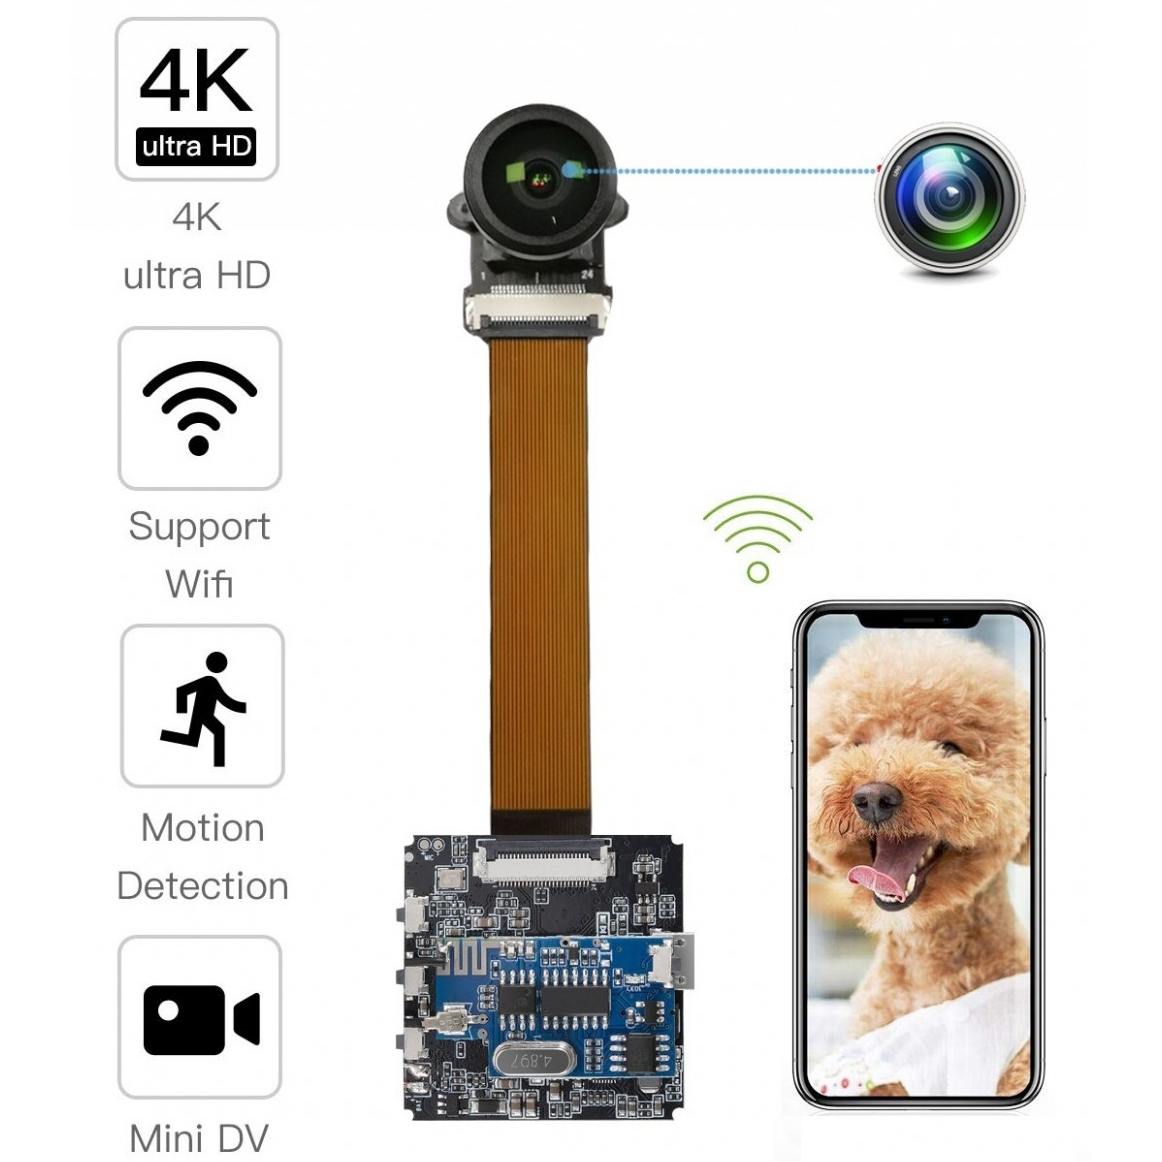 New Arrival ChinaEHOMFUL MINI SPY CAMERA-
 4K Real Ultra HD DIY Wireless Camera Big Wide Angle 6CM Mini DVR Motion Detection Nanny Cam Security System APP Control Action Camera up to 400GB – MATECAM